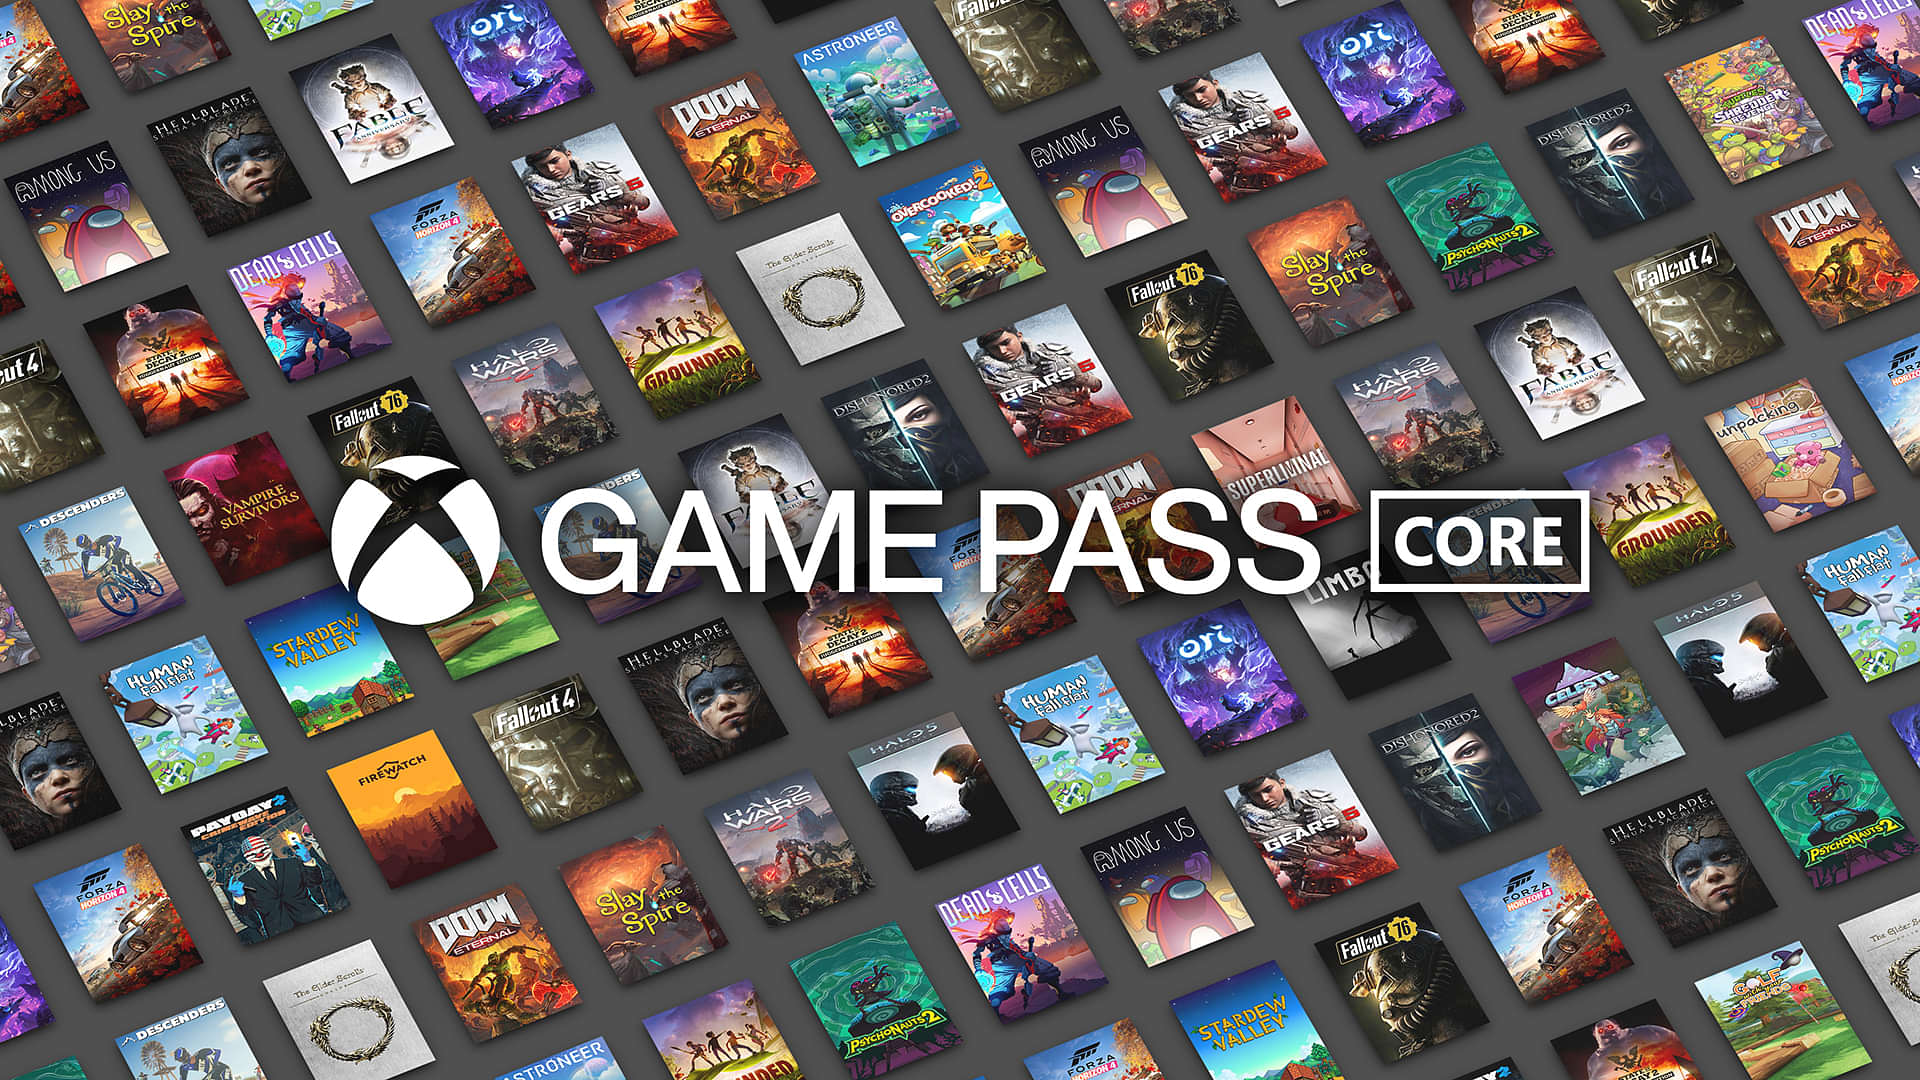 Thoughts on Gamepass icon? - Art Design Support - Developer Forum